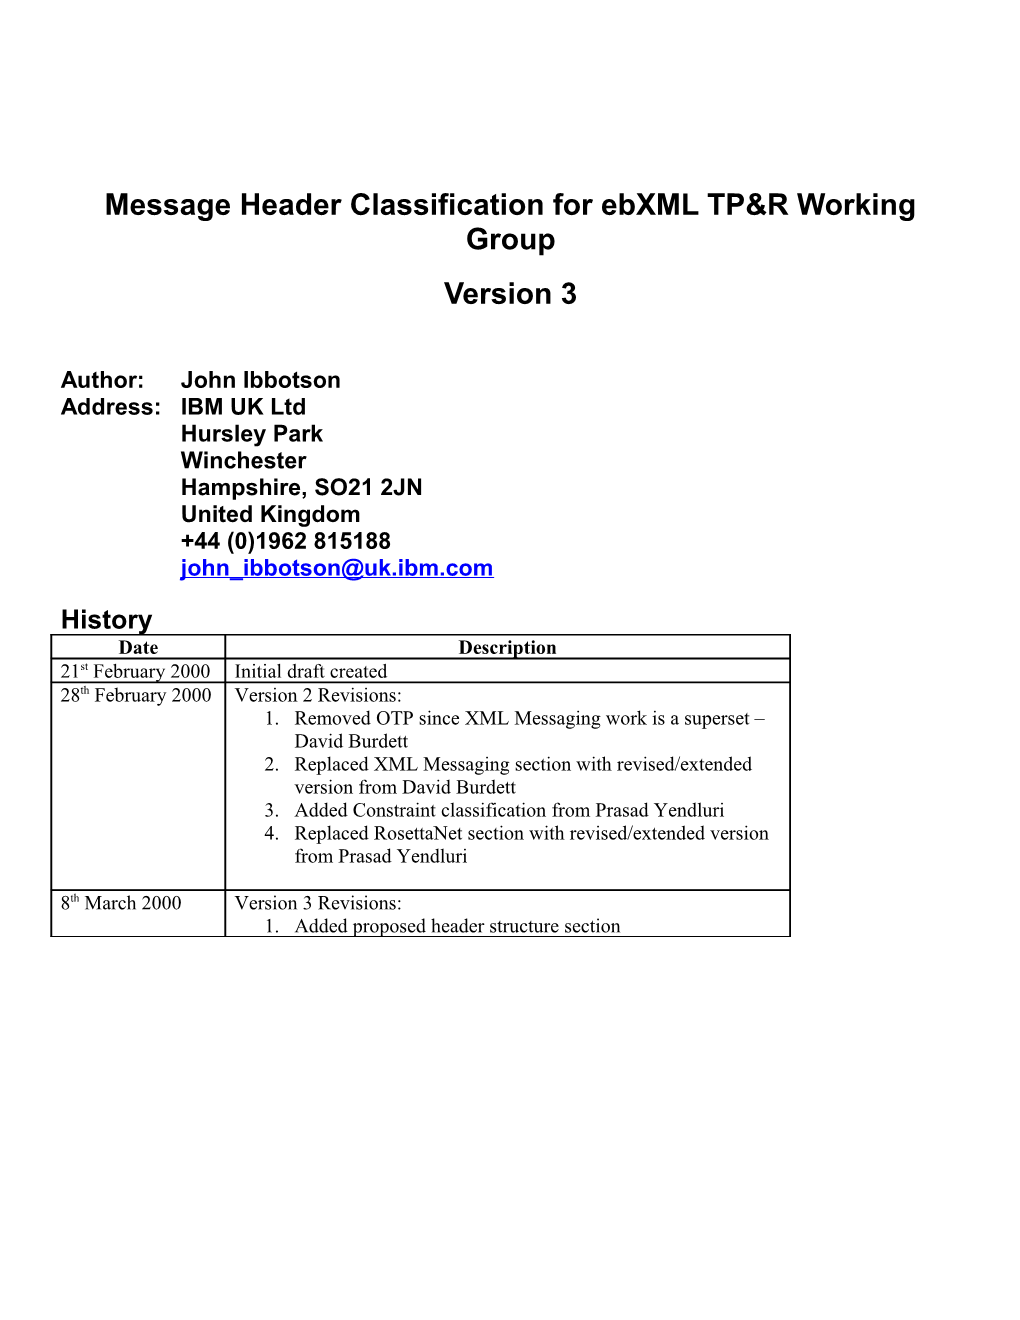 Message Header Classification for Ebxml TP&R Working Group